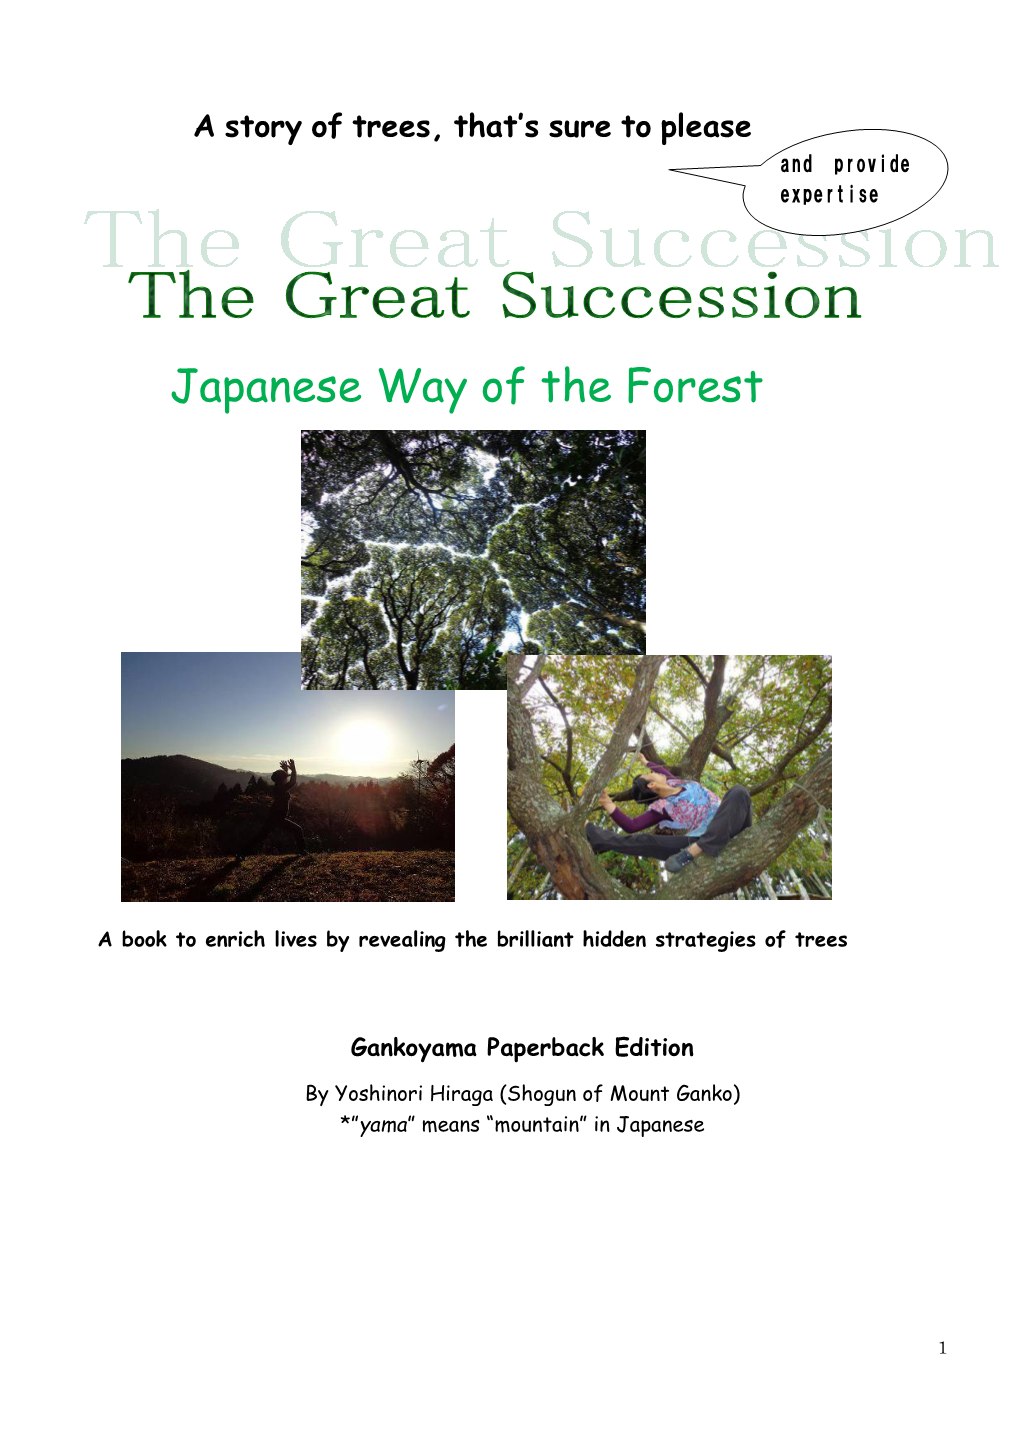 Japanese Way of the Forest